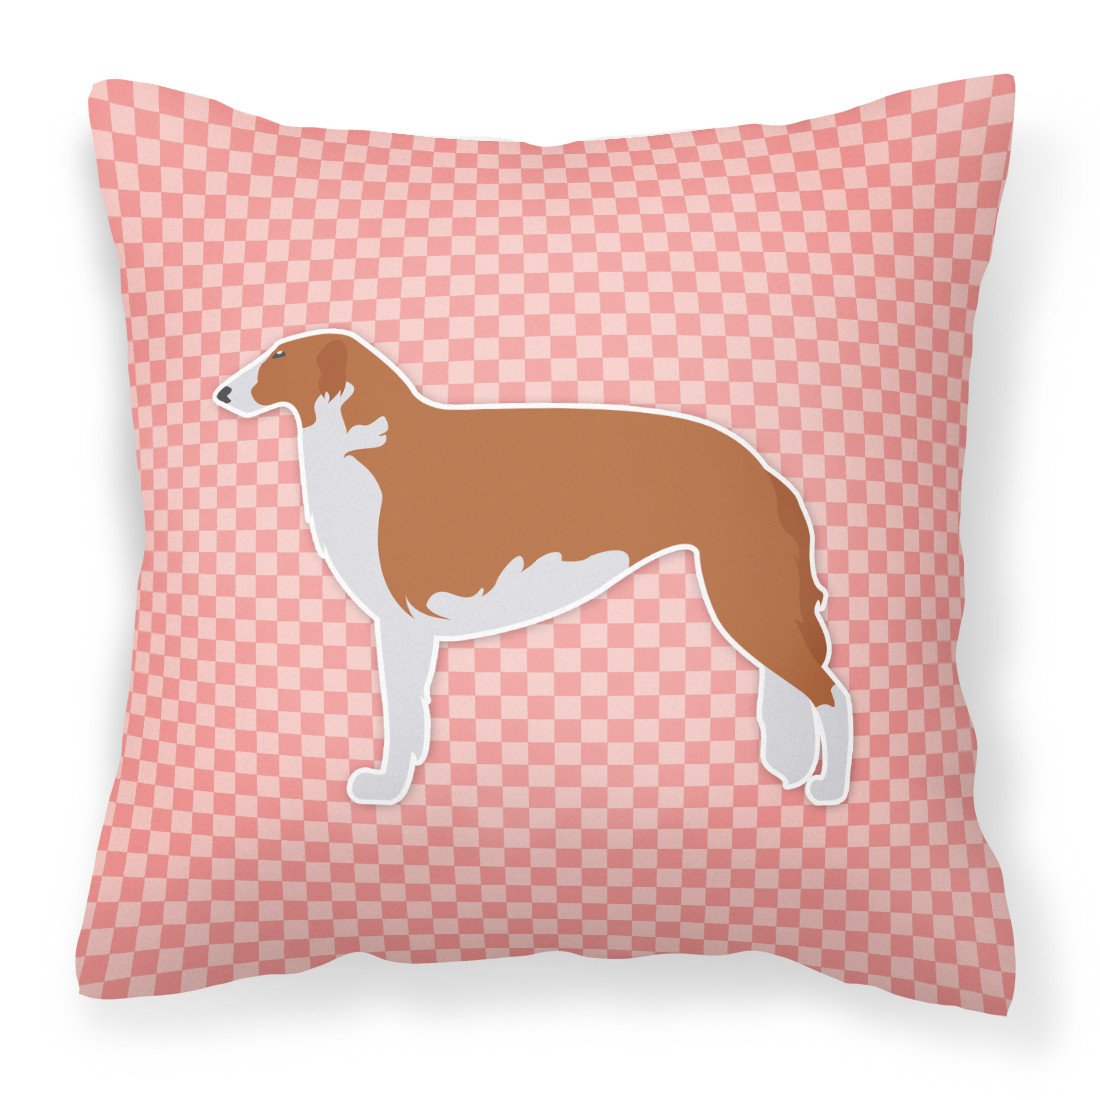 Borzoi Russian Greyhound Checkerboard Pink Fabric Decorative Pillow BB3599PW1818 by Caroline's Treasures